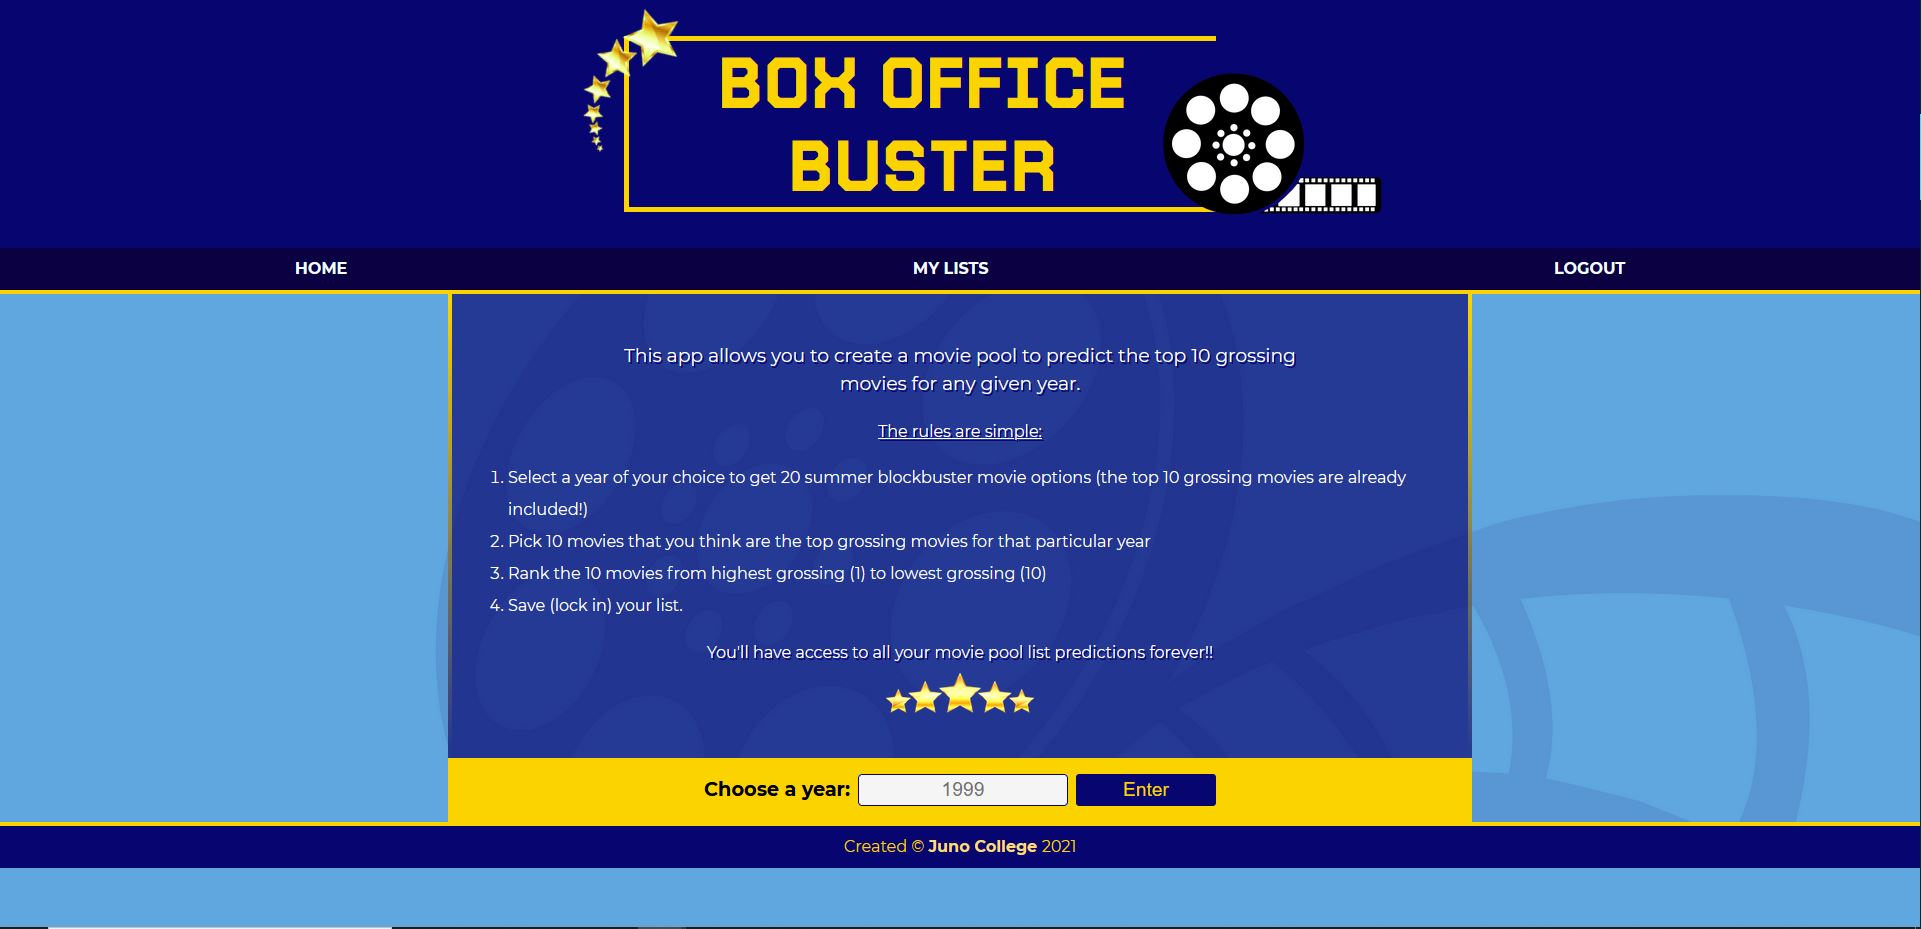 Screenshot of the box office boffo app where users can guess the top 10 grossing movies